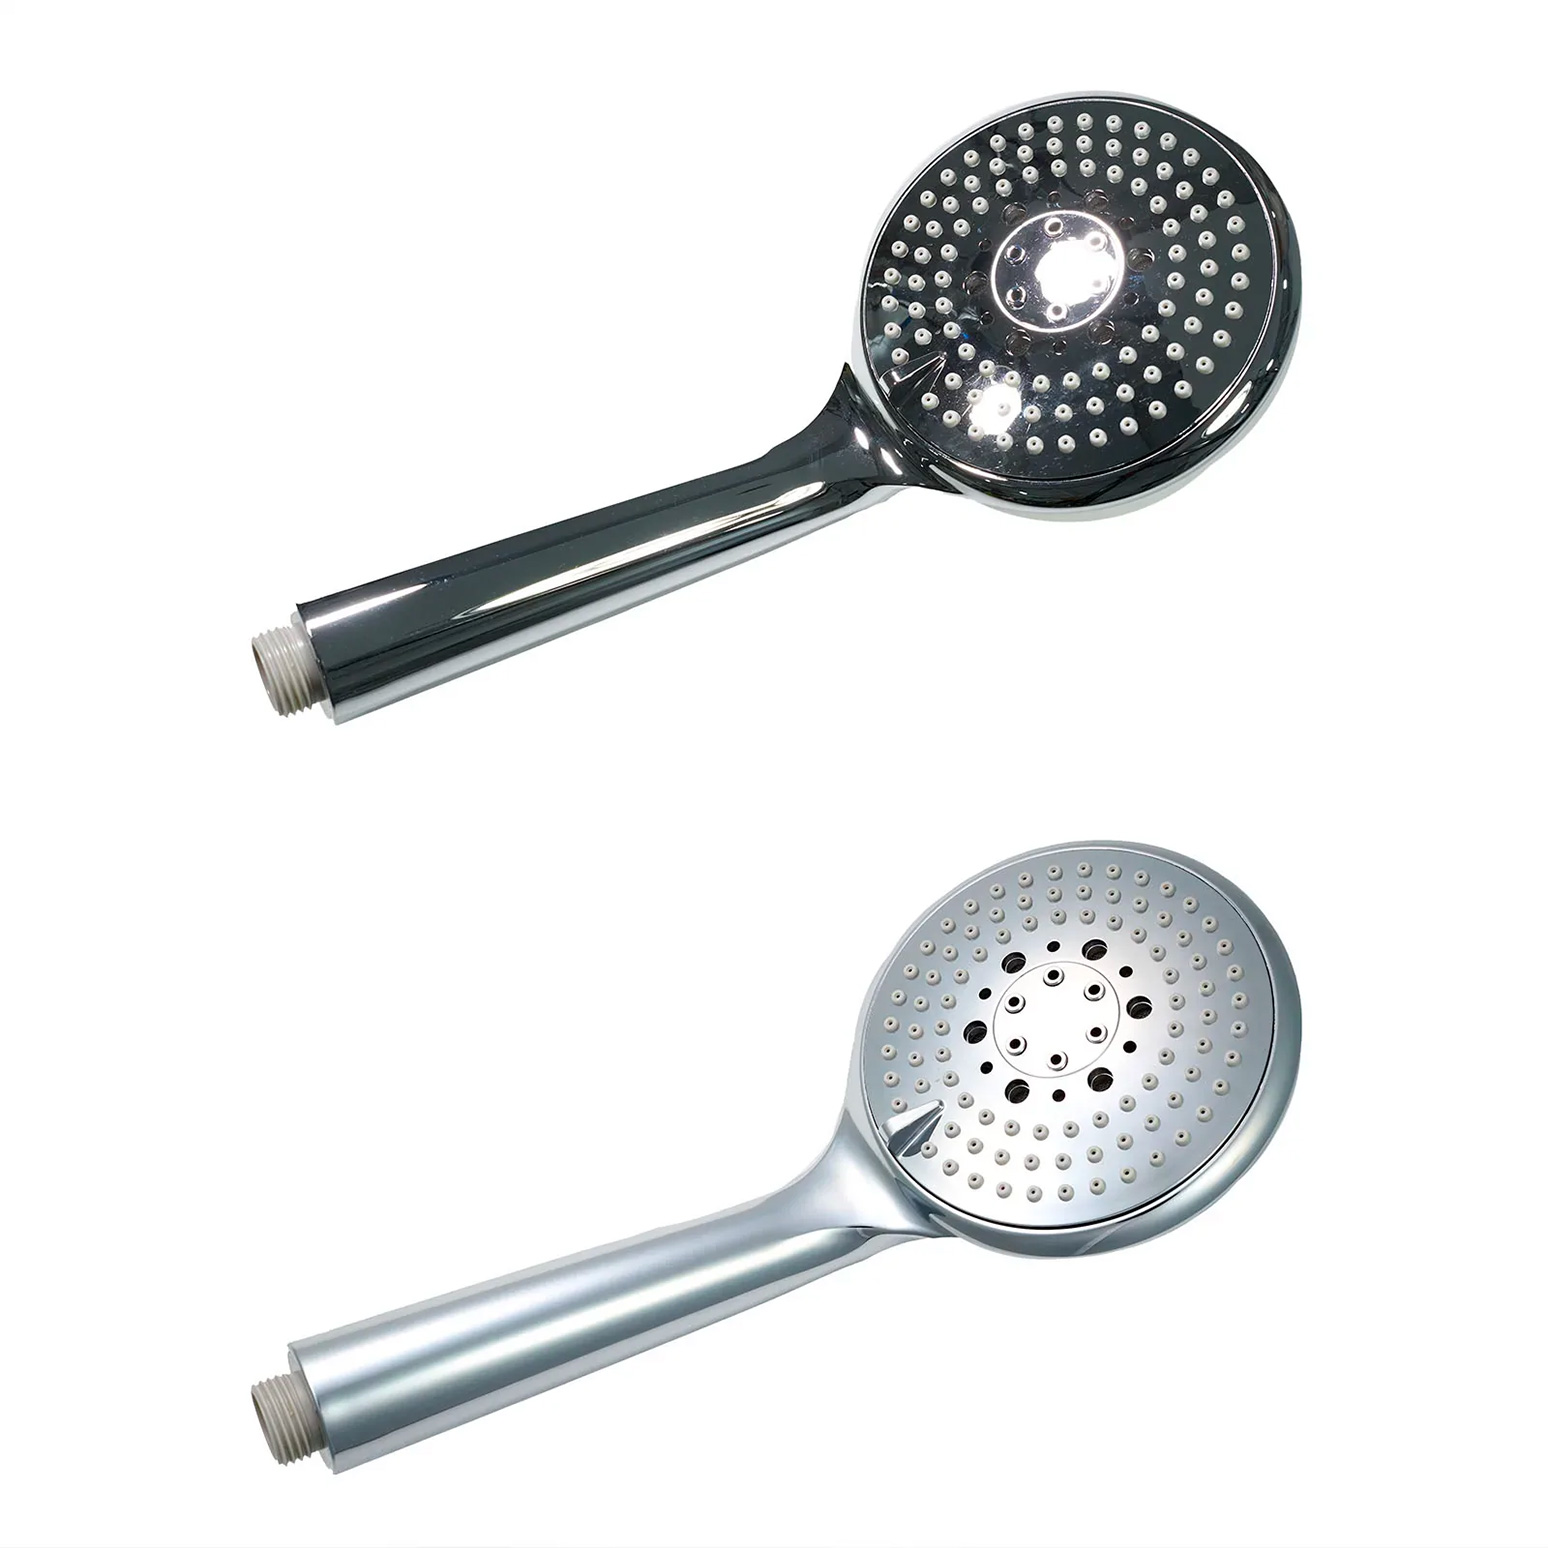 Karl Taylor Light Cone, V-Flats Showerhead before/after example image